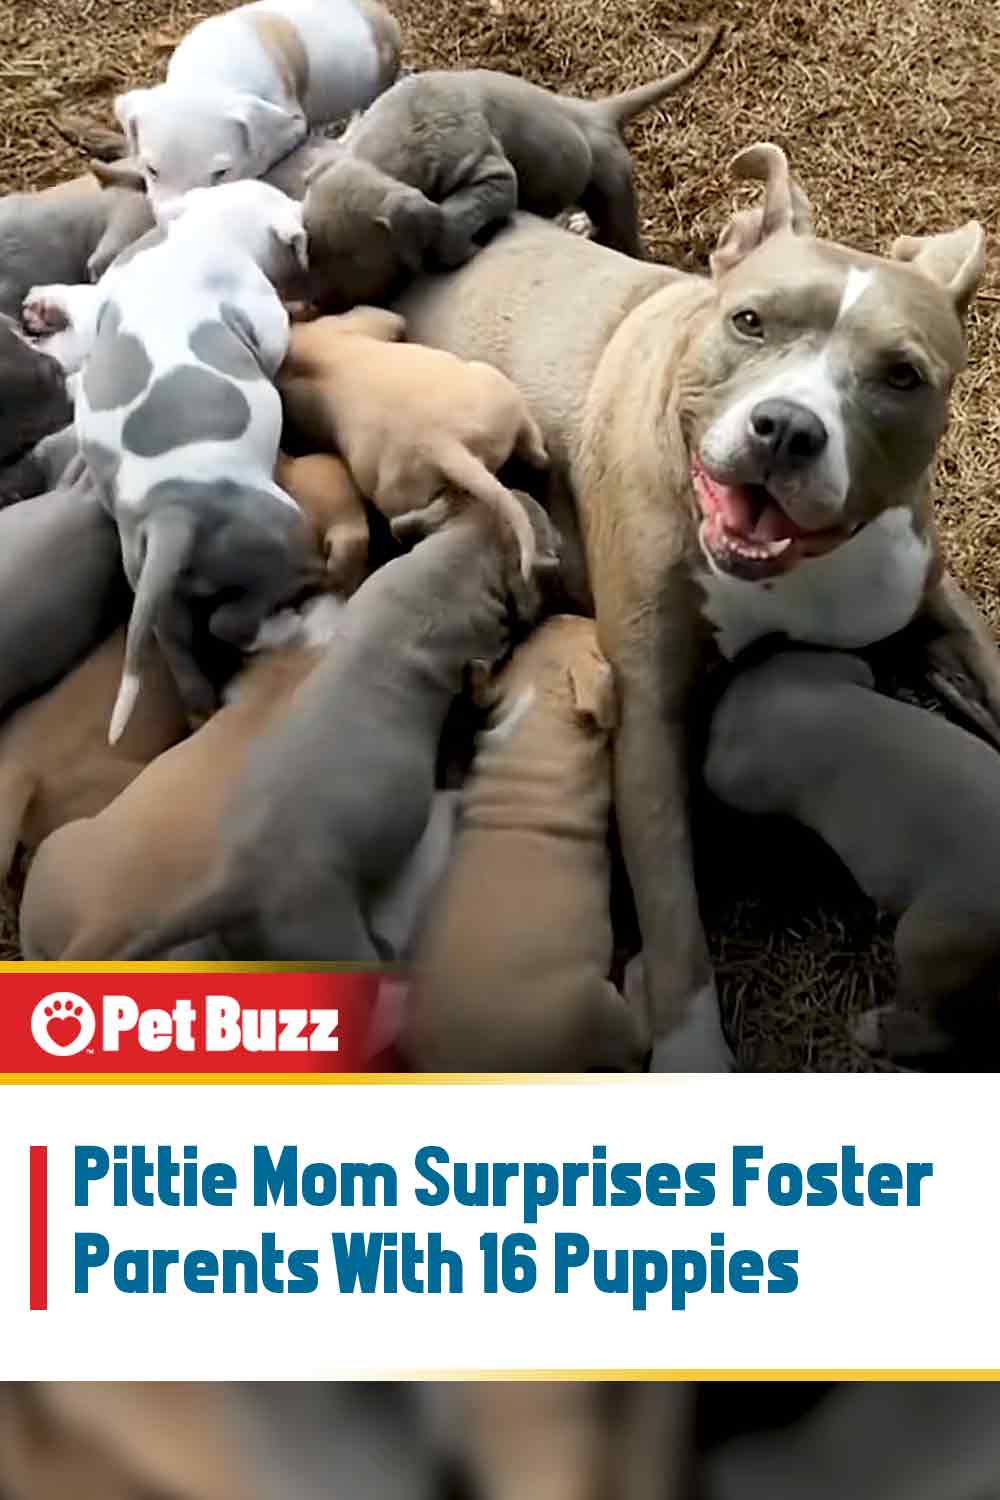 Pittie Mom Surprises Foster Parents With 16 Puppies